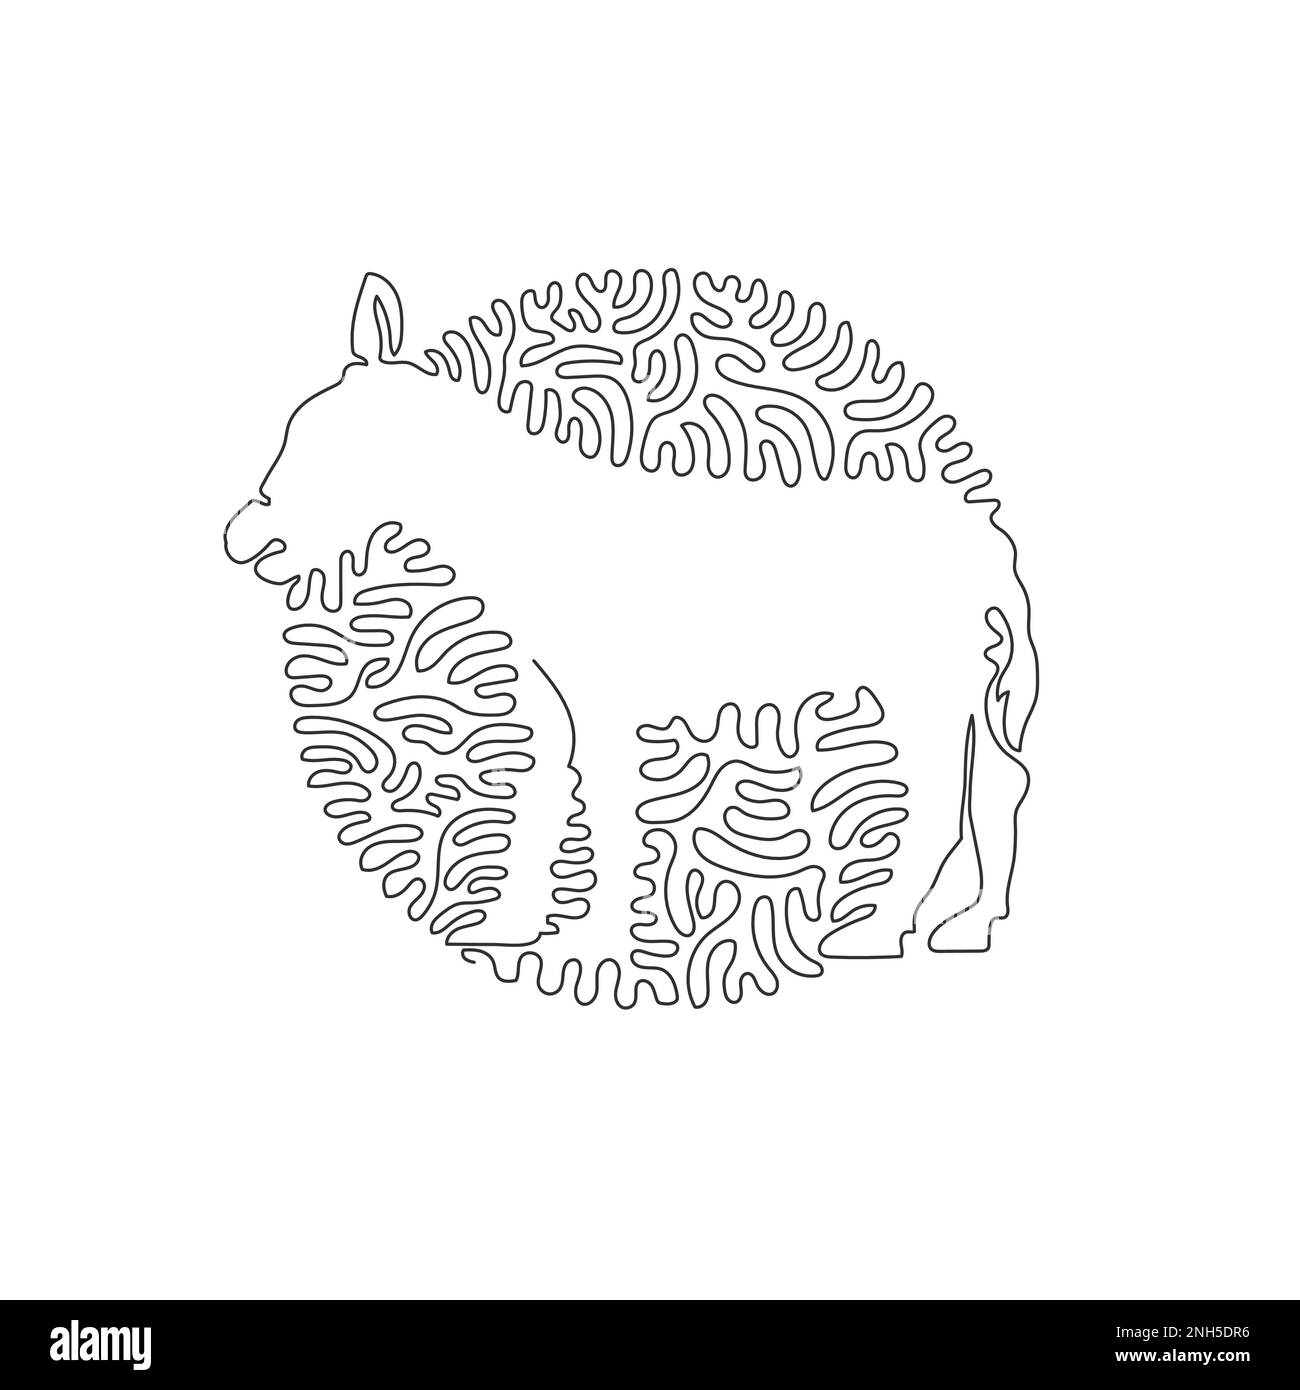 Continuous curve one line drawing of small donkeys abstract art in circle. Single line editable stroke vector illustration of domesticated donkey Stock Vector